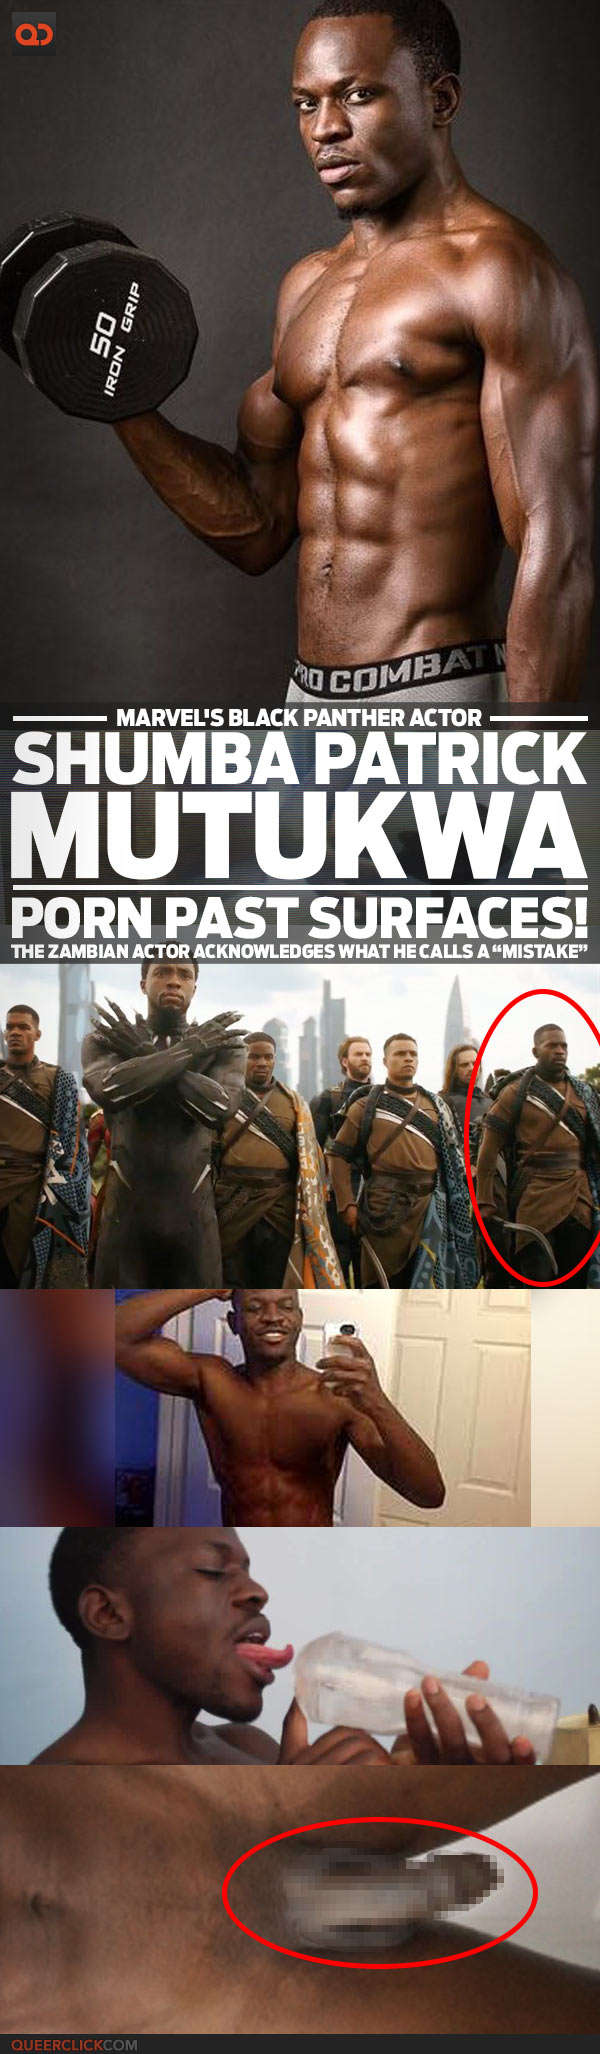 Shumba Patrick Mutukwa, Marvel's Black Panther Actor, Porn Past Surfaces! - The Zambian Actor Acknowledges What He Calls A “Mistake”